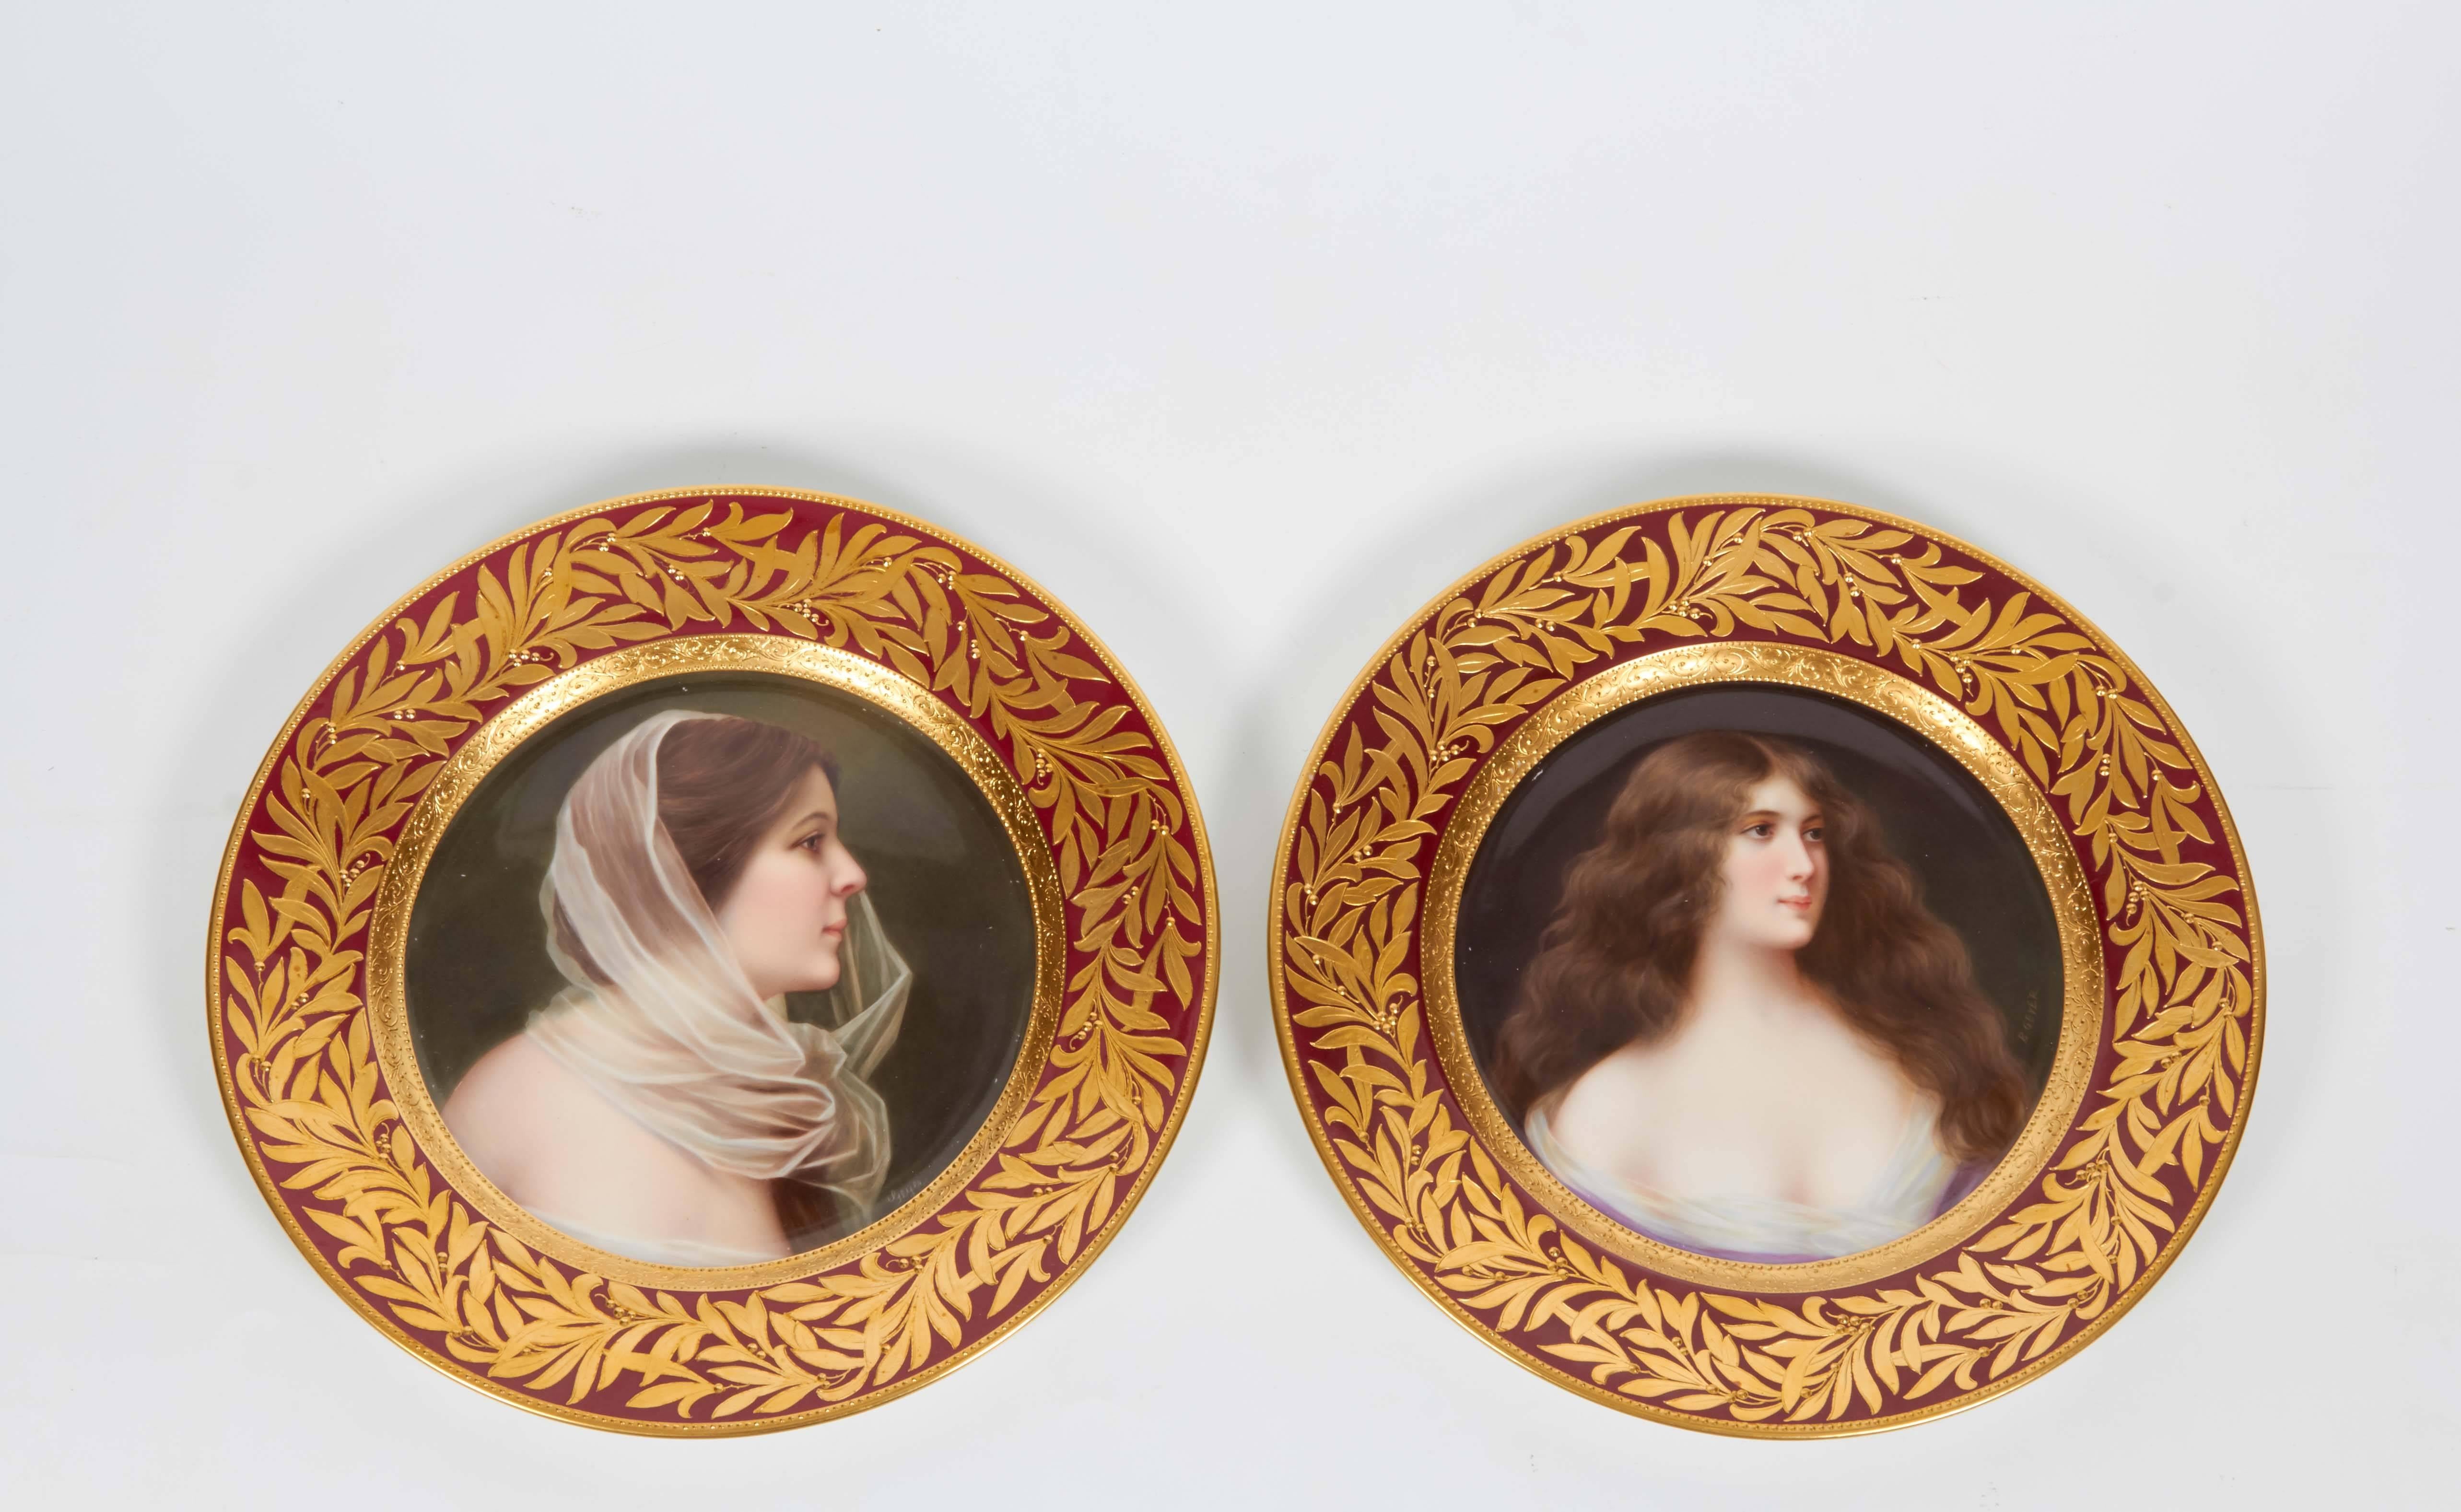 Early 20th Century 12 American, Vienna Style, CAC/Lenox Porcelain Portrait Plates, Tiffany & Co